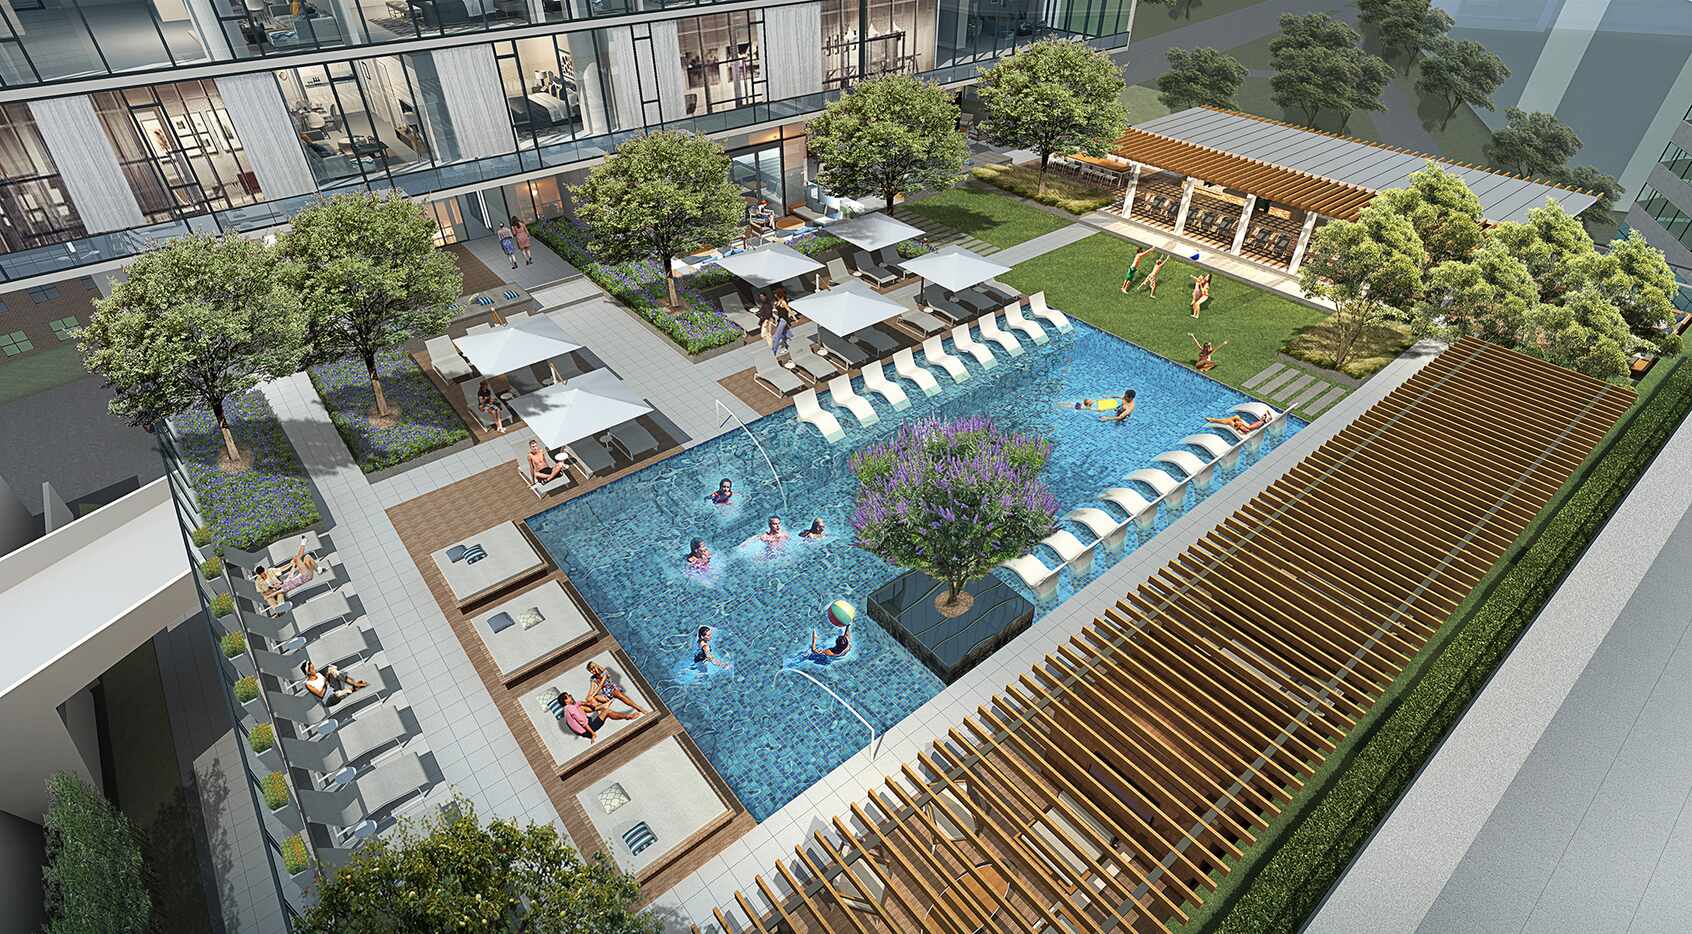 The Victor will have a pool and outdoor lounge area for tenants on the ninth floor.